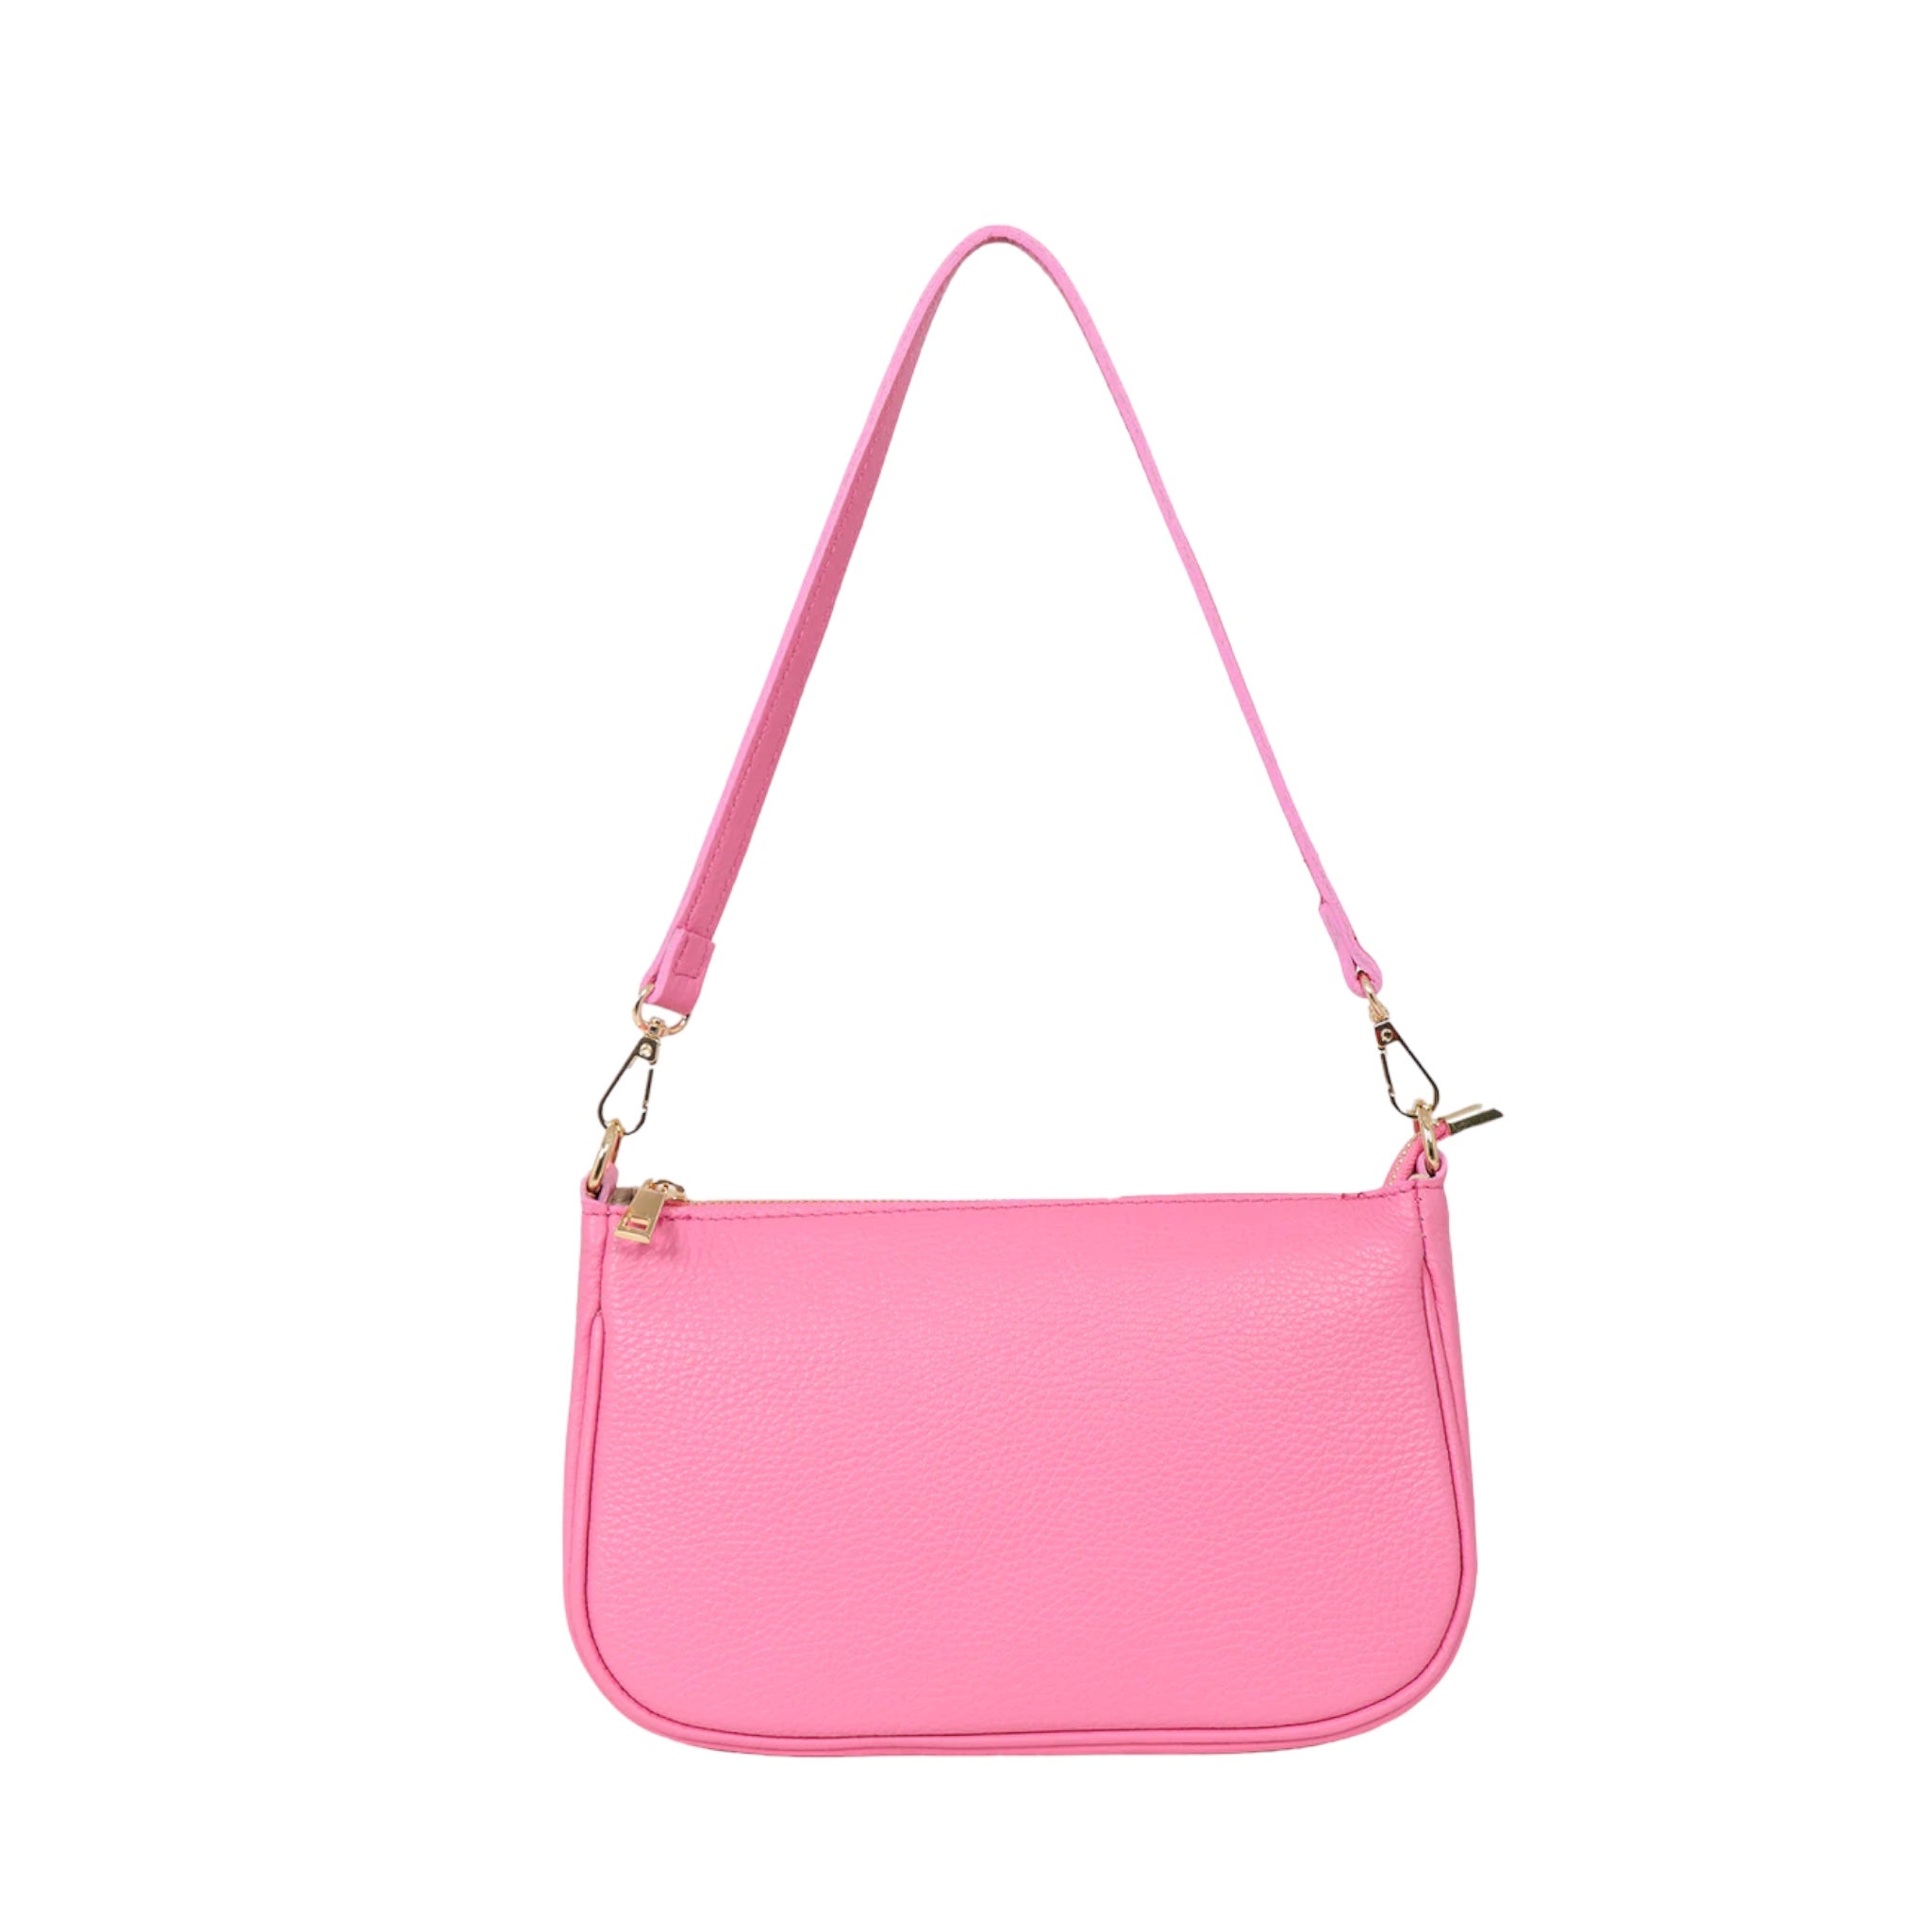 Italian-Leather-Baguettte-Bag-Pink-Product-Image-Front-View